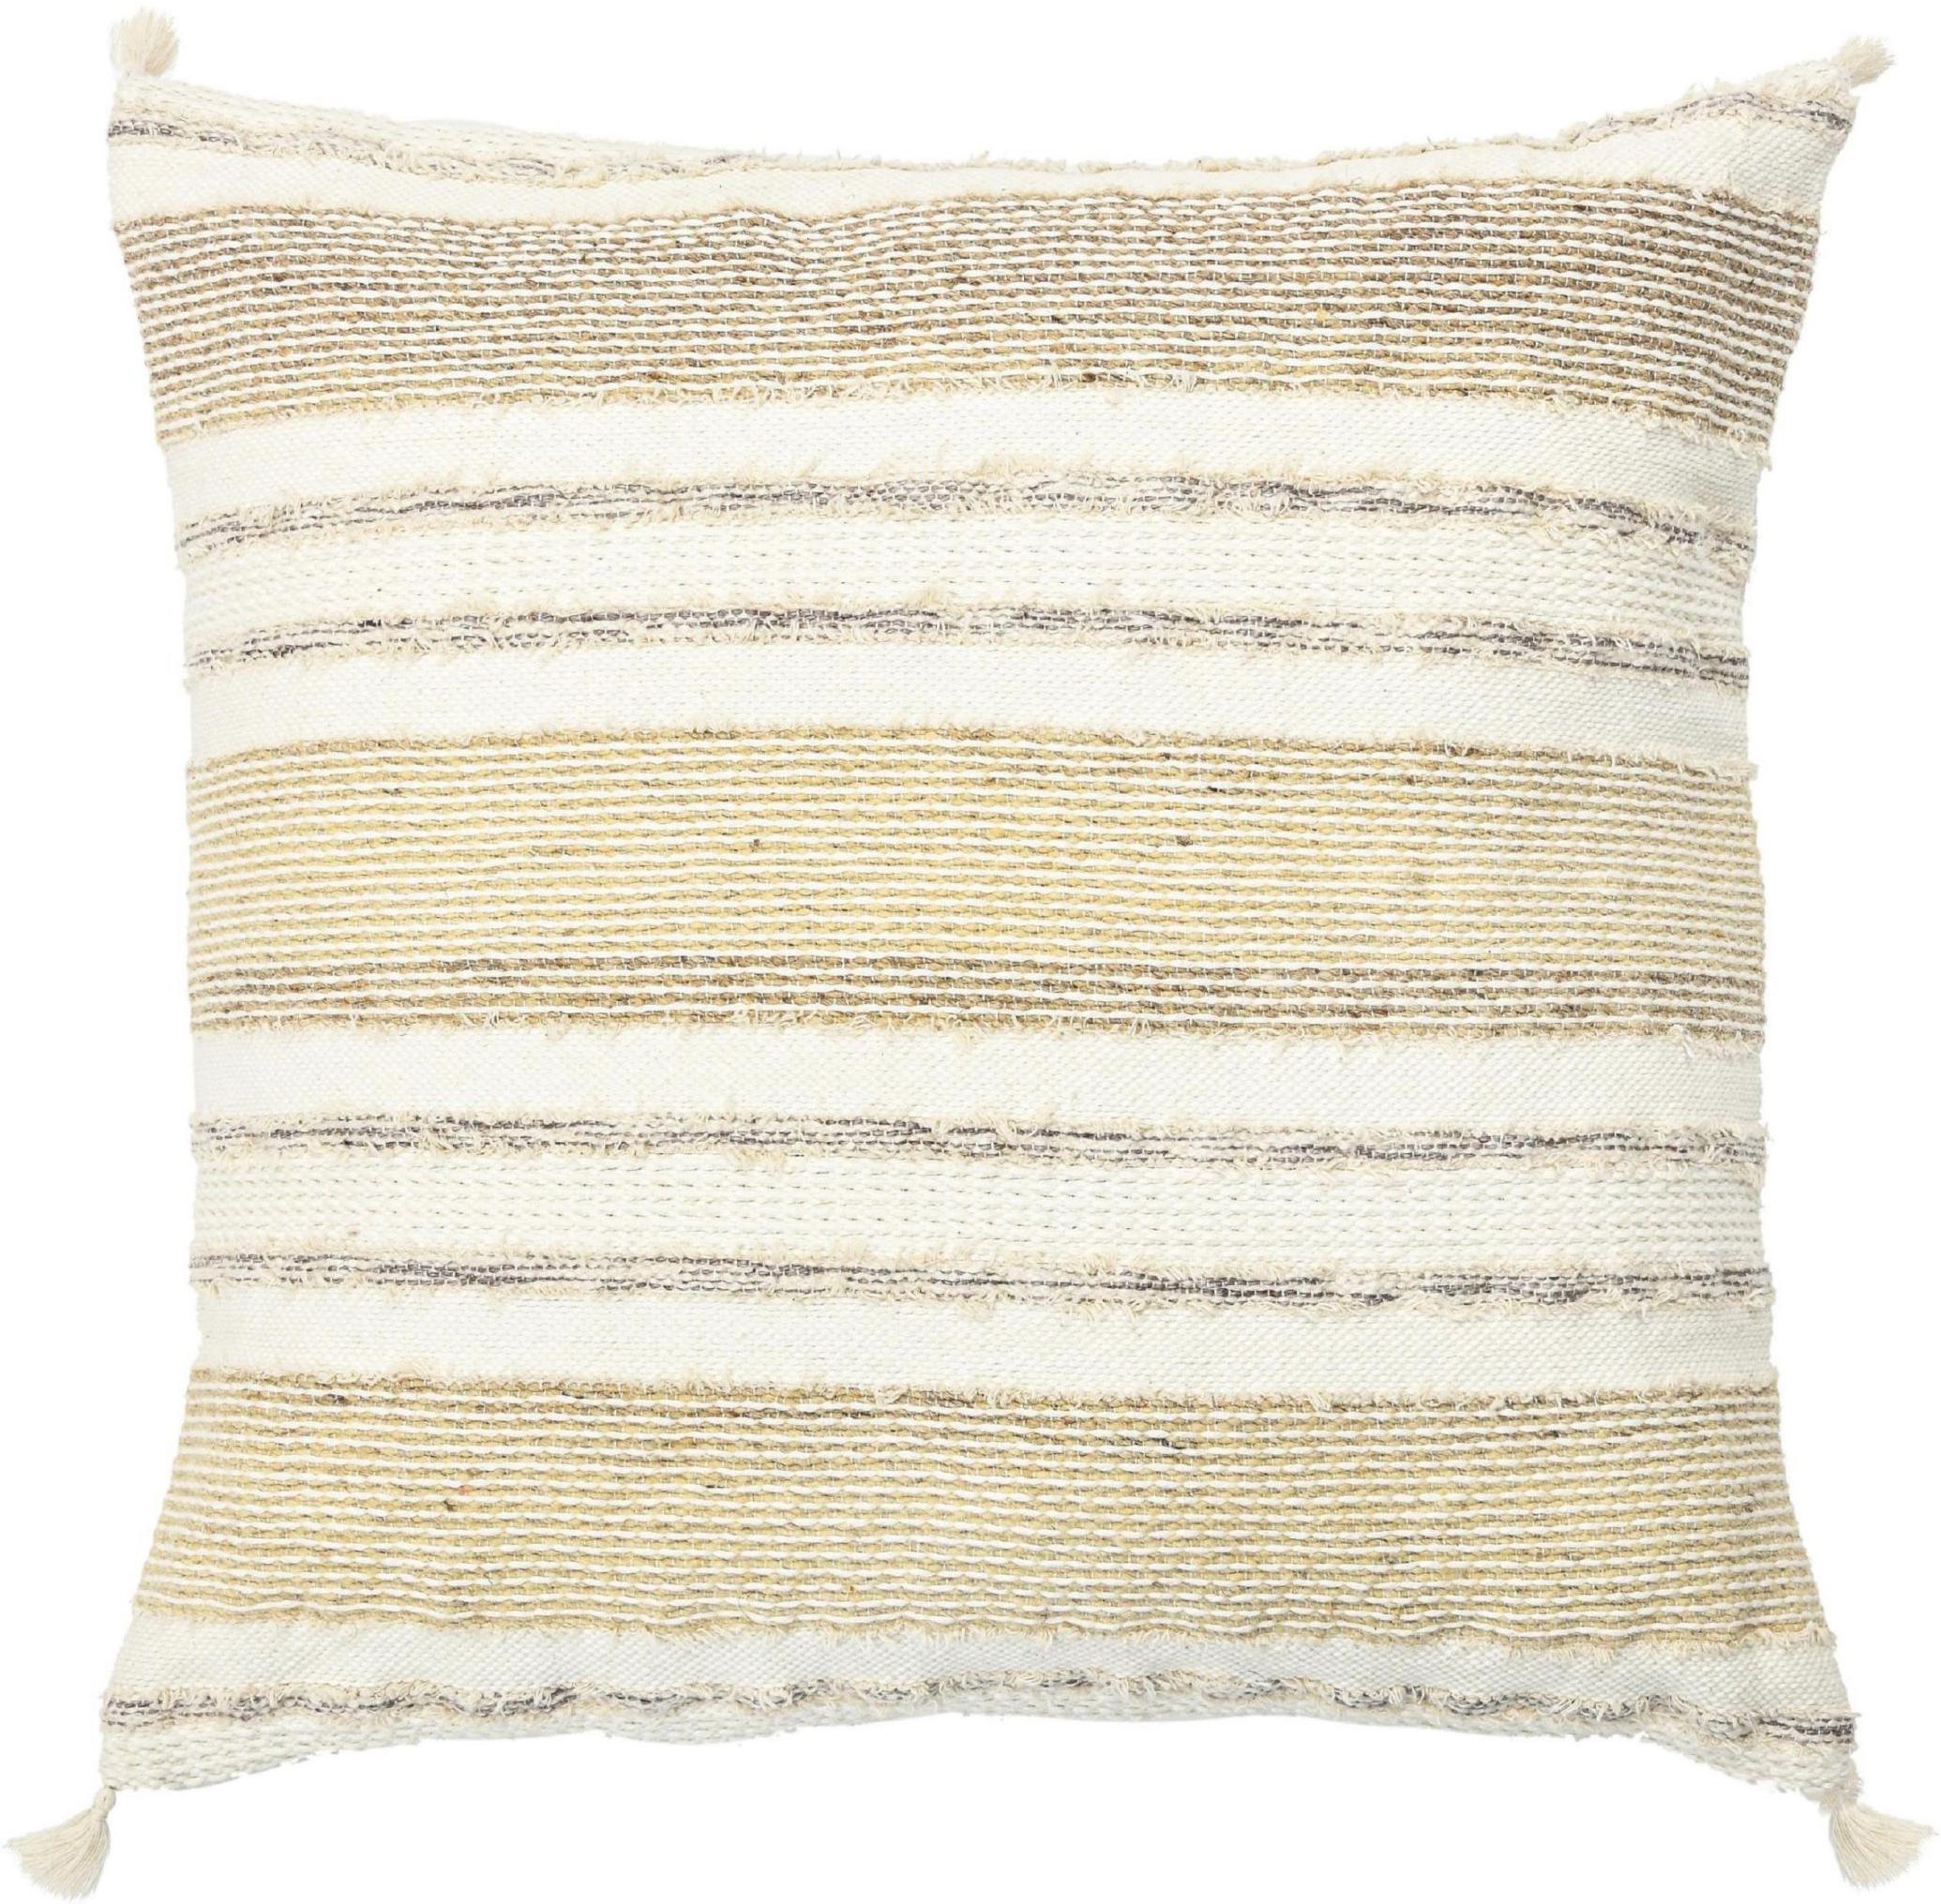 Hand-Knotted Modern Wool and Cotton Pillow With Striped Pattern In Beige For Sale